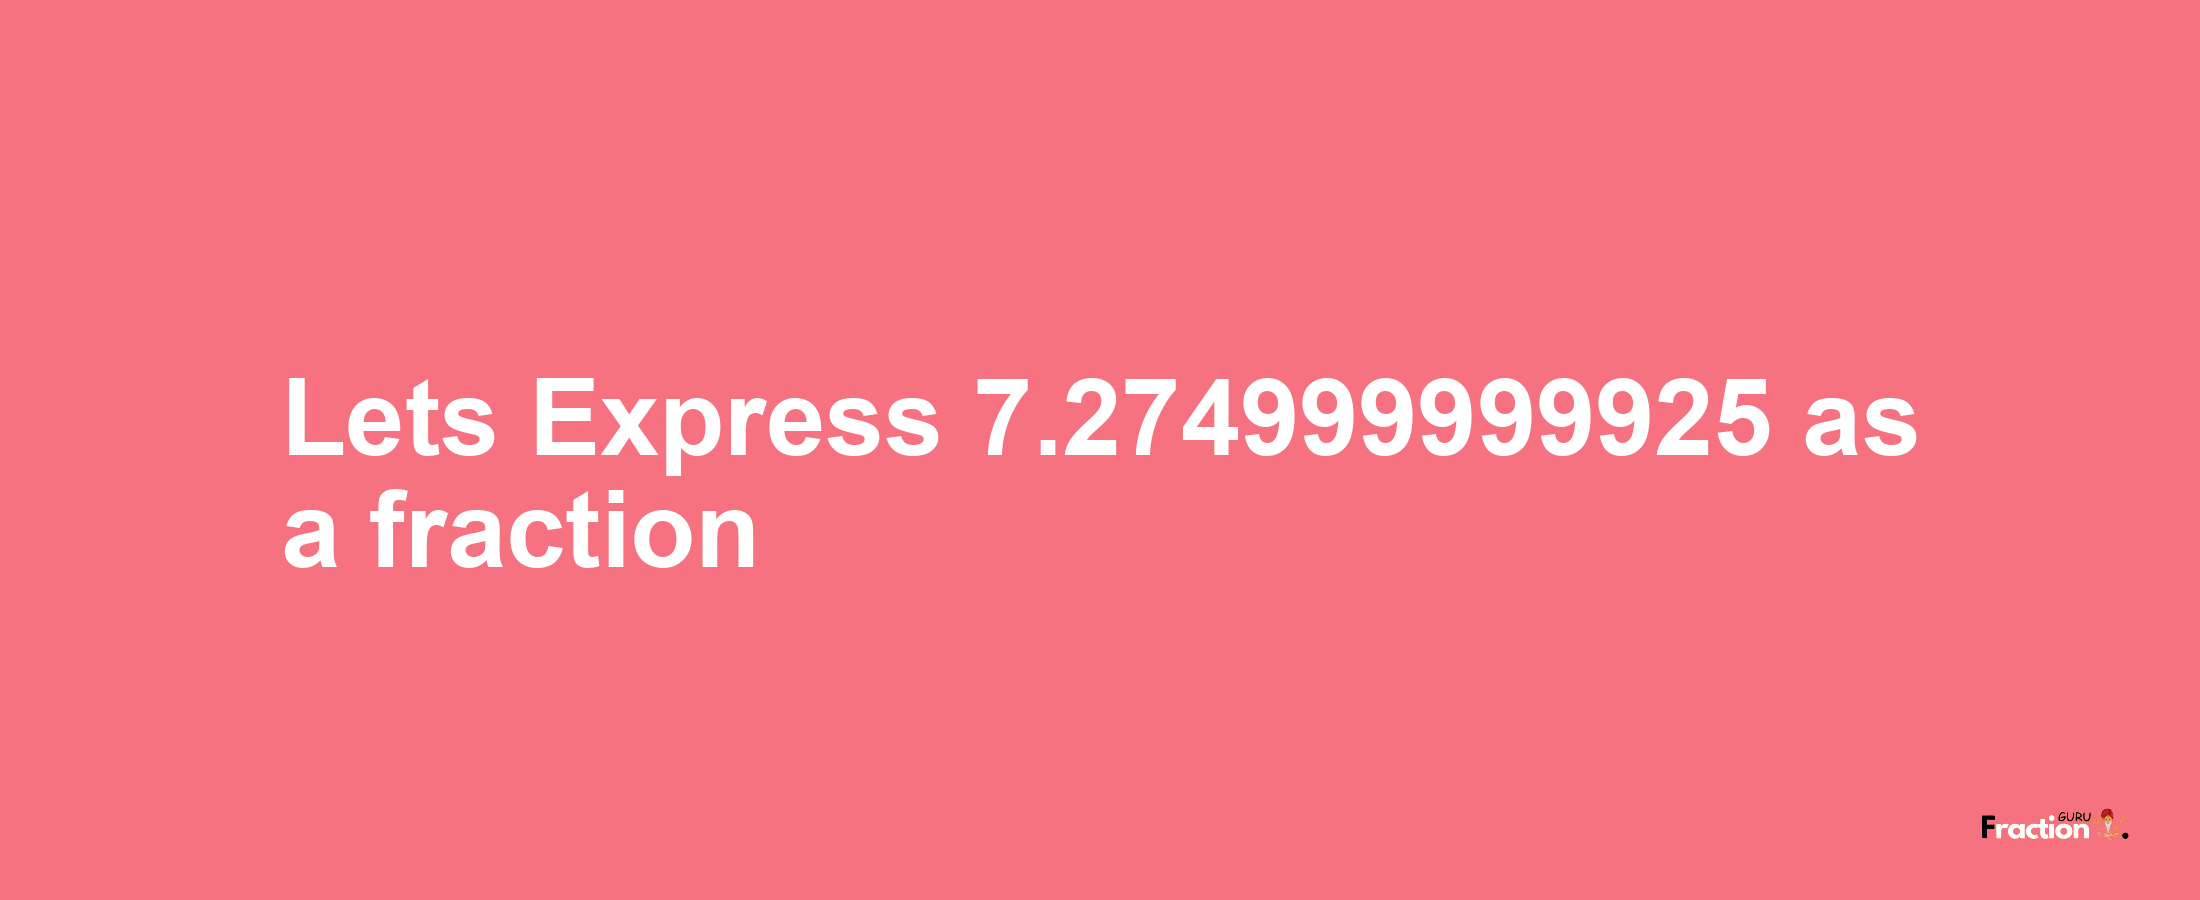 Lets Express 7.274999999925 as afraction